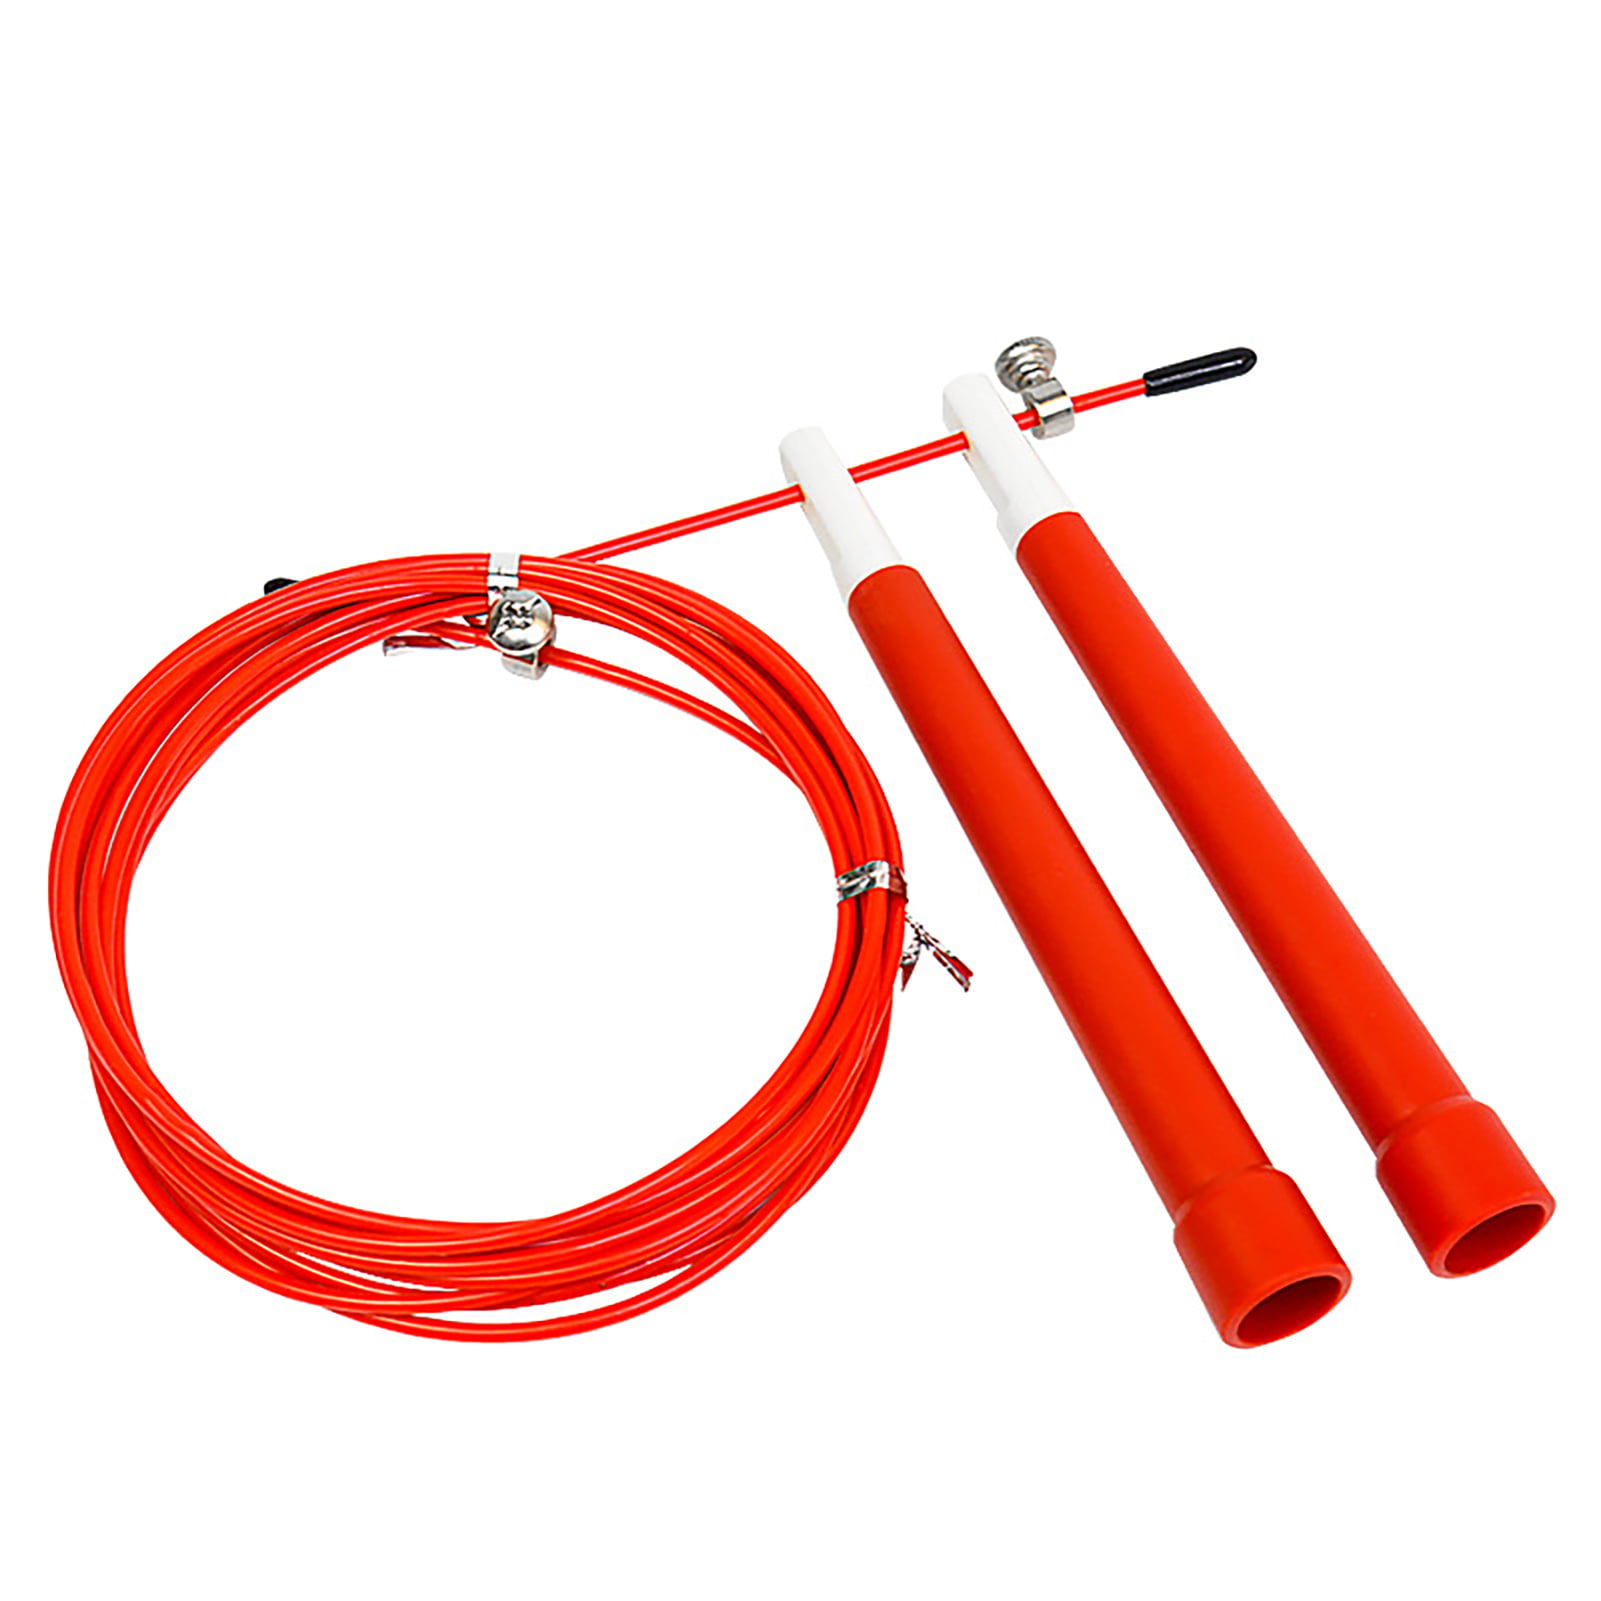 Details about   Jump Rope Speed Skipping Rope Jumping Rope Cable Exercise Boxing Gym Fitness 